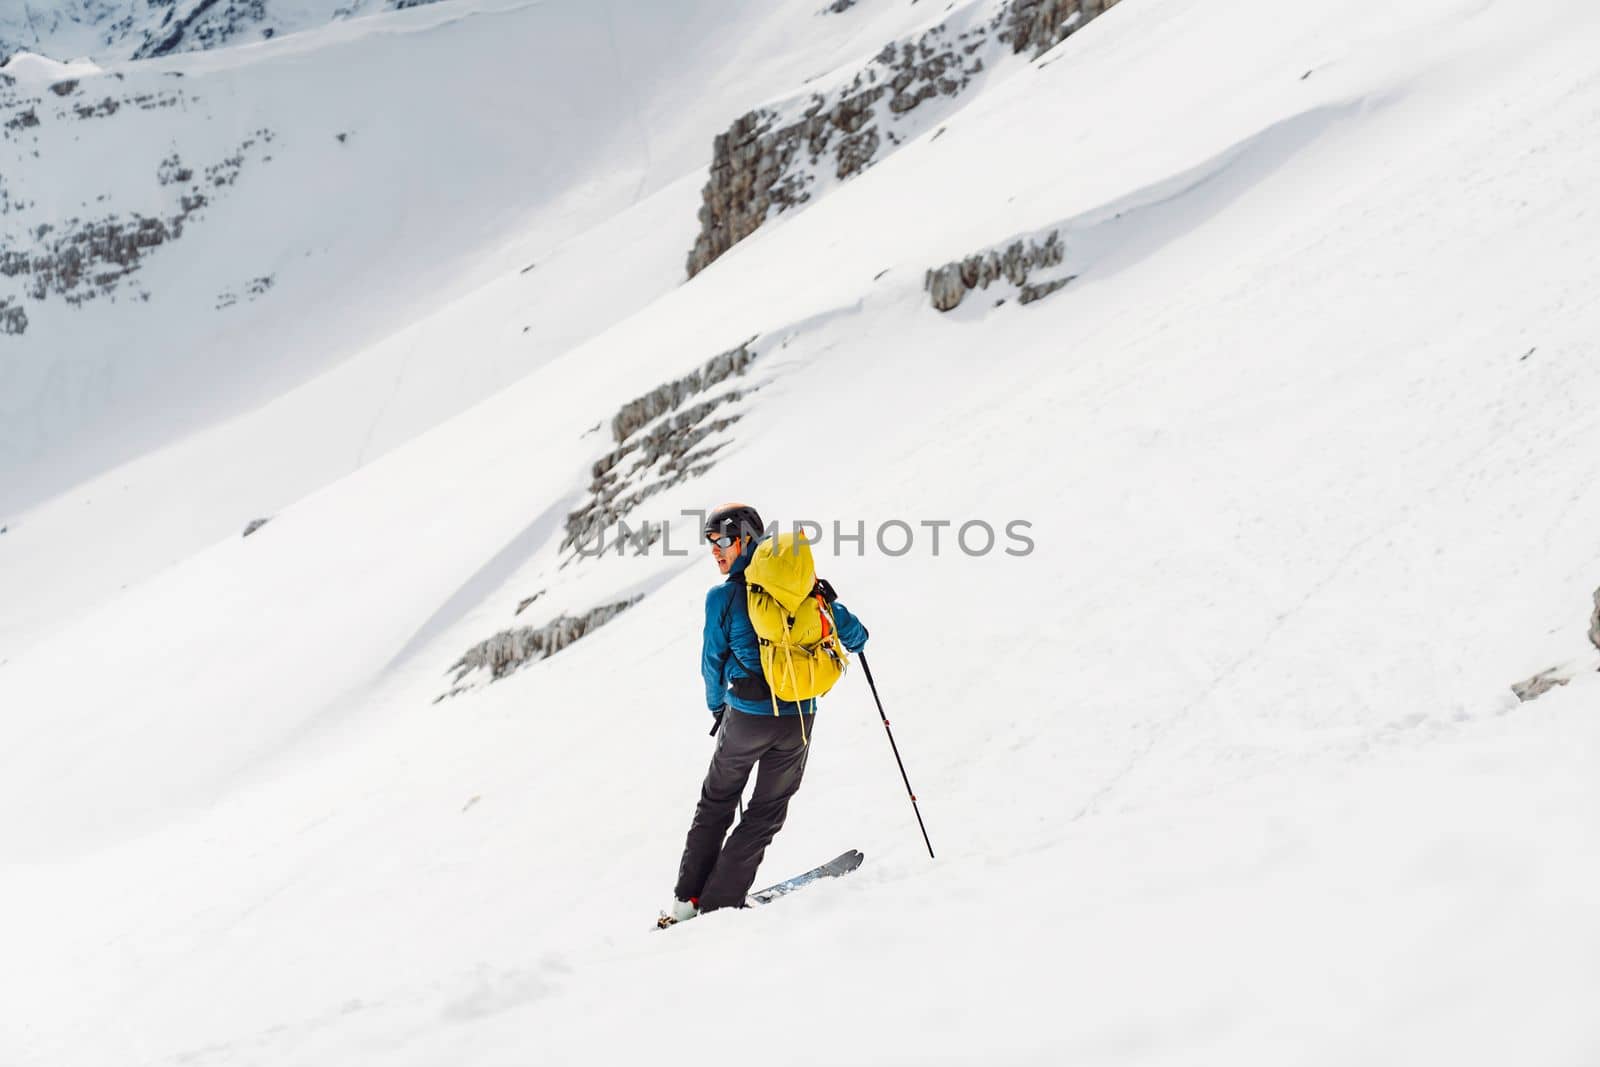 View from the back man ski touring with a yellow backpack, descending down the snowy mountain by VisualProductions